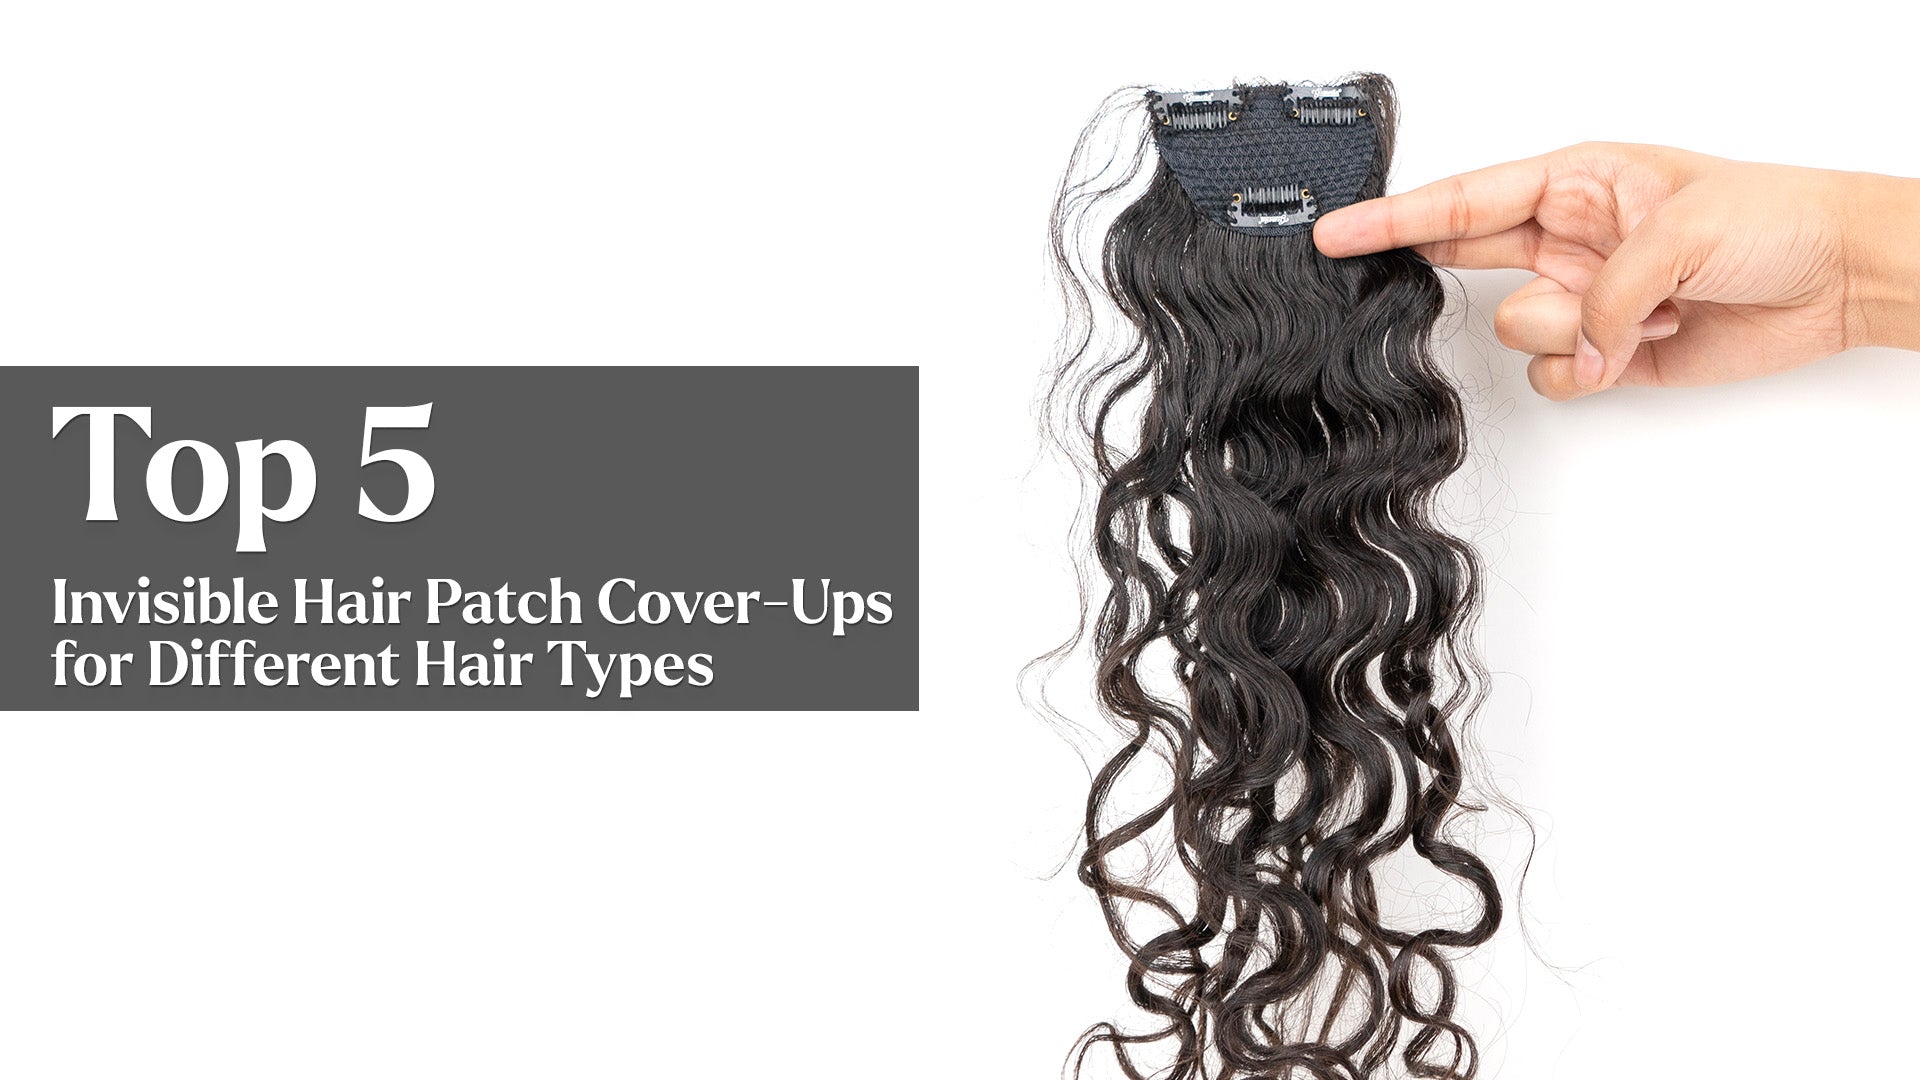 Top 5 Invisible Hair Patch Cover-Ups for Different Hair Types